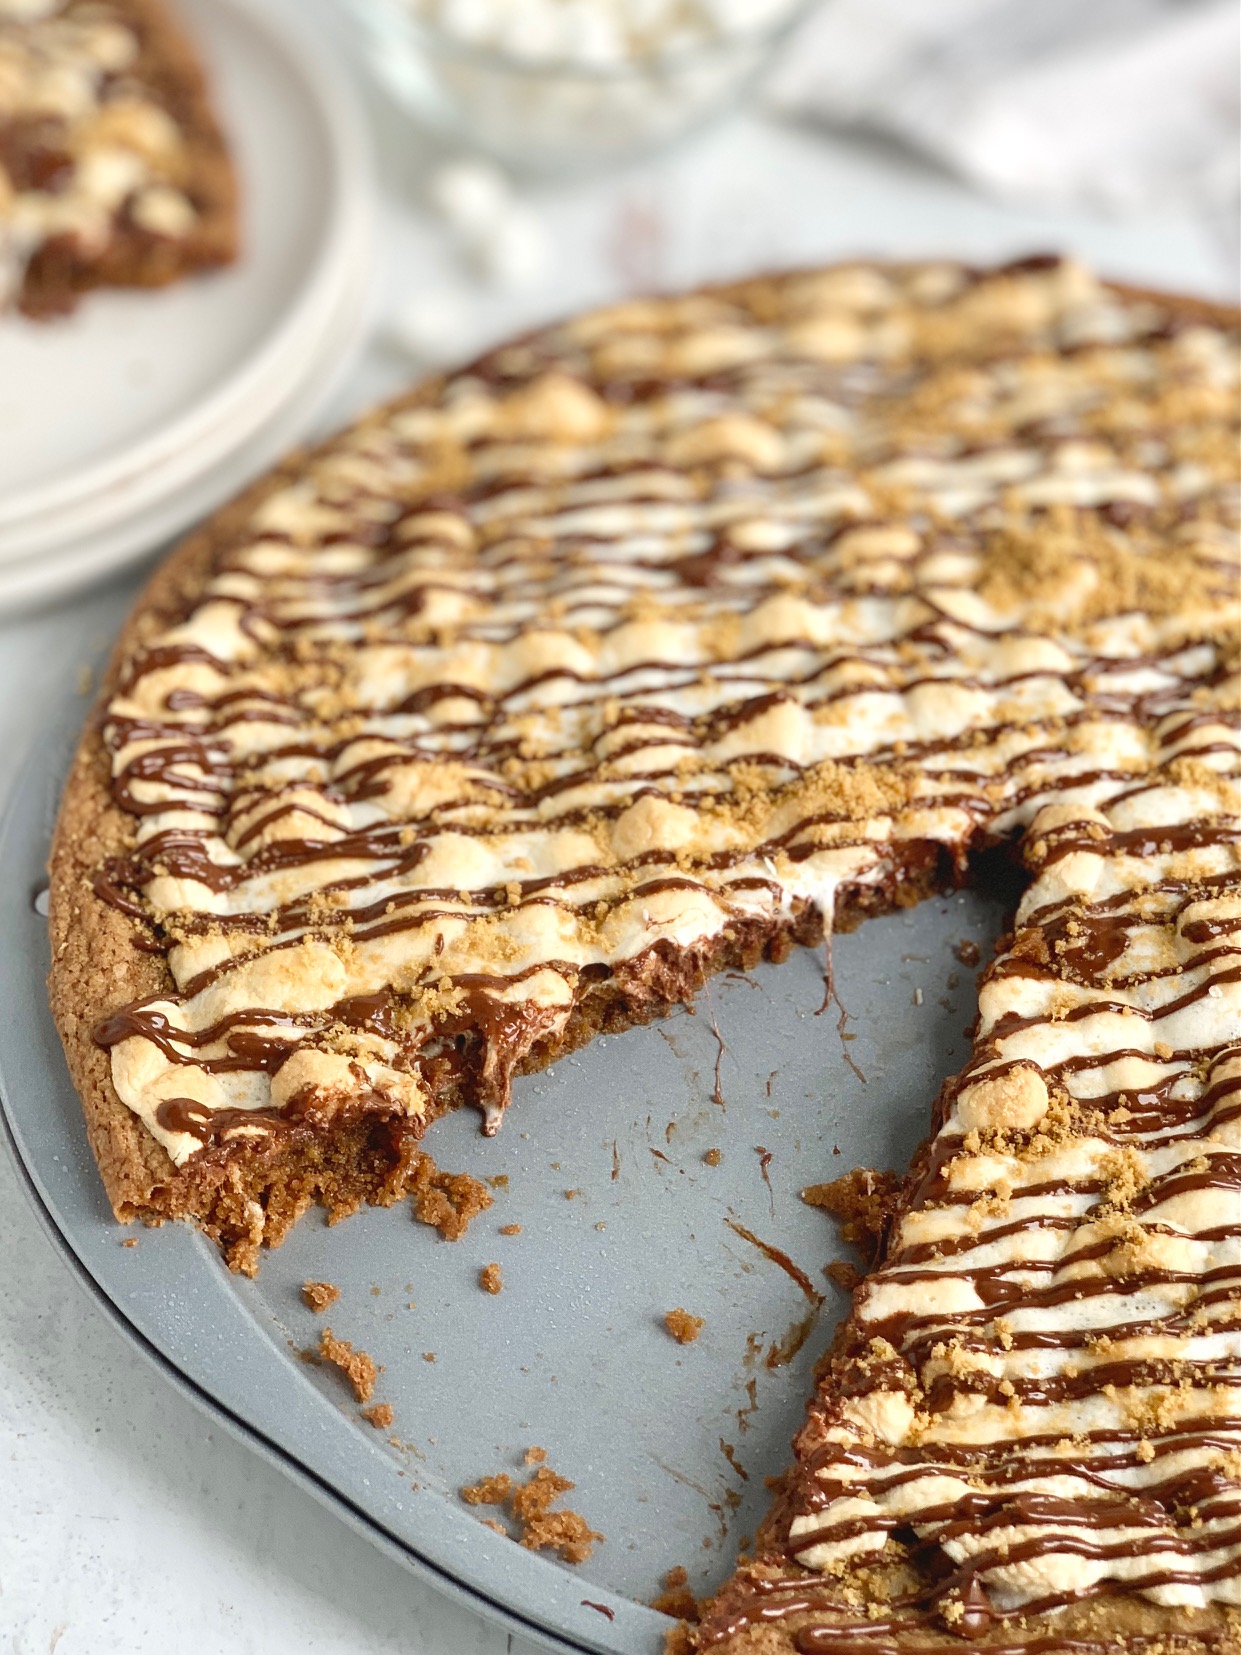 A pizza pan layered with a graham cracker crust, melted chocolate, golden brown mini marshmallows, then drizzled with chocolate and topped with graham cracker crumbs. A large slice is removed from the pizza and placed on a plate nearby.